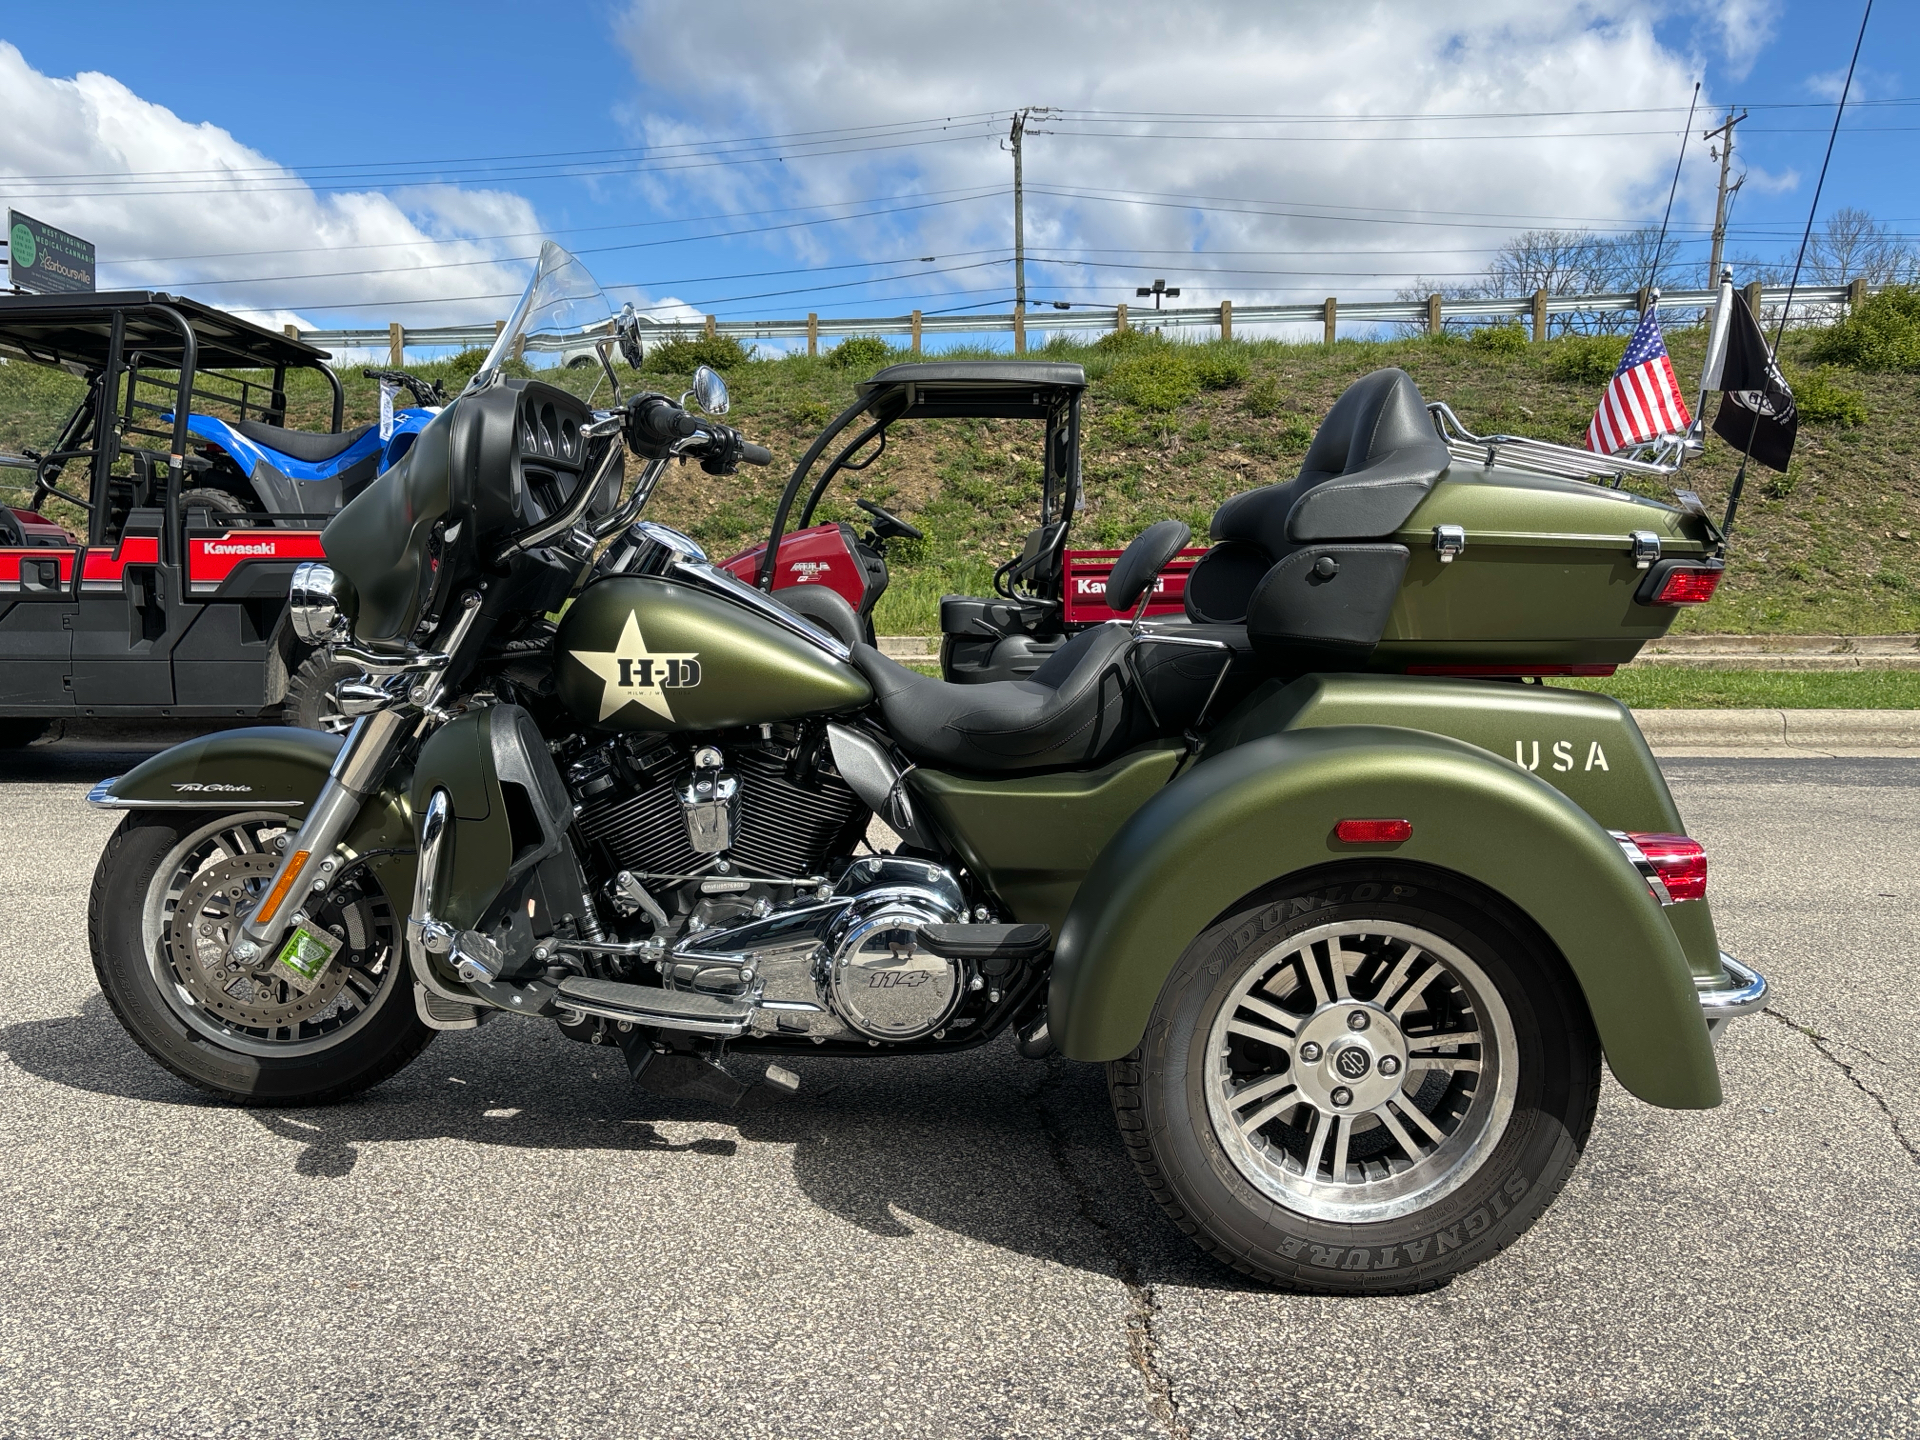 2022 Harley-Davidson Tri Glide Ultra (G.I. Enthusiast Collection) in Barboursville, West Virginia - Photo 6